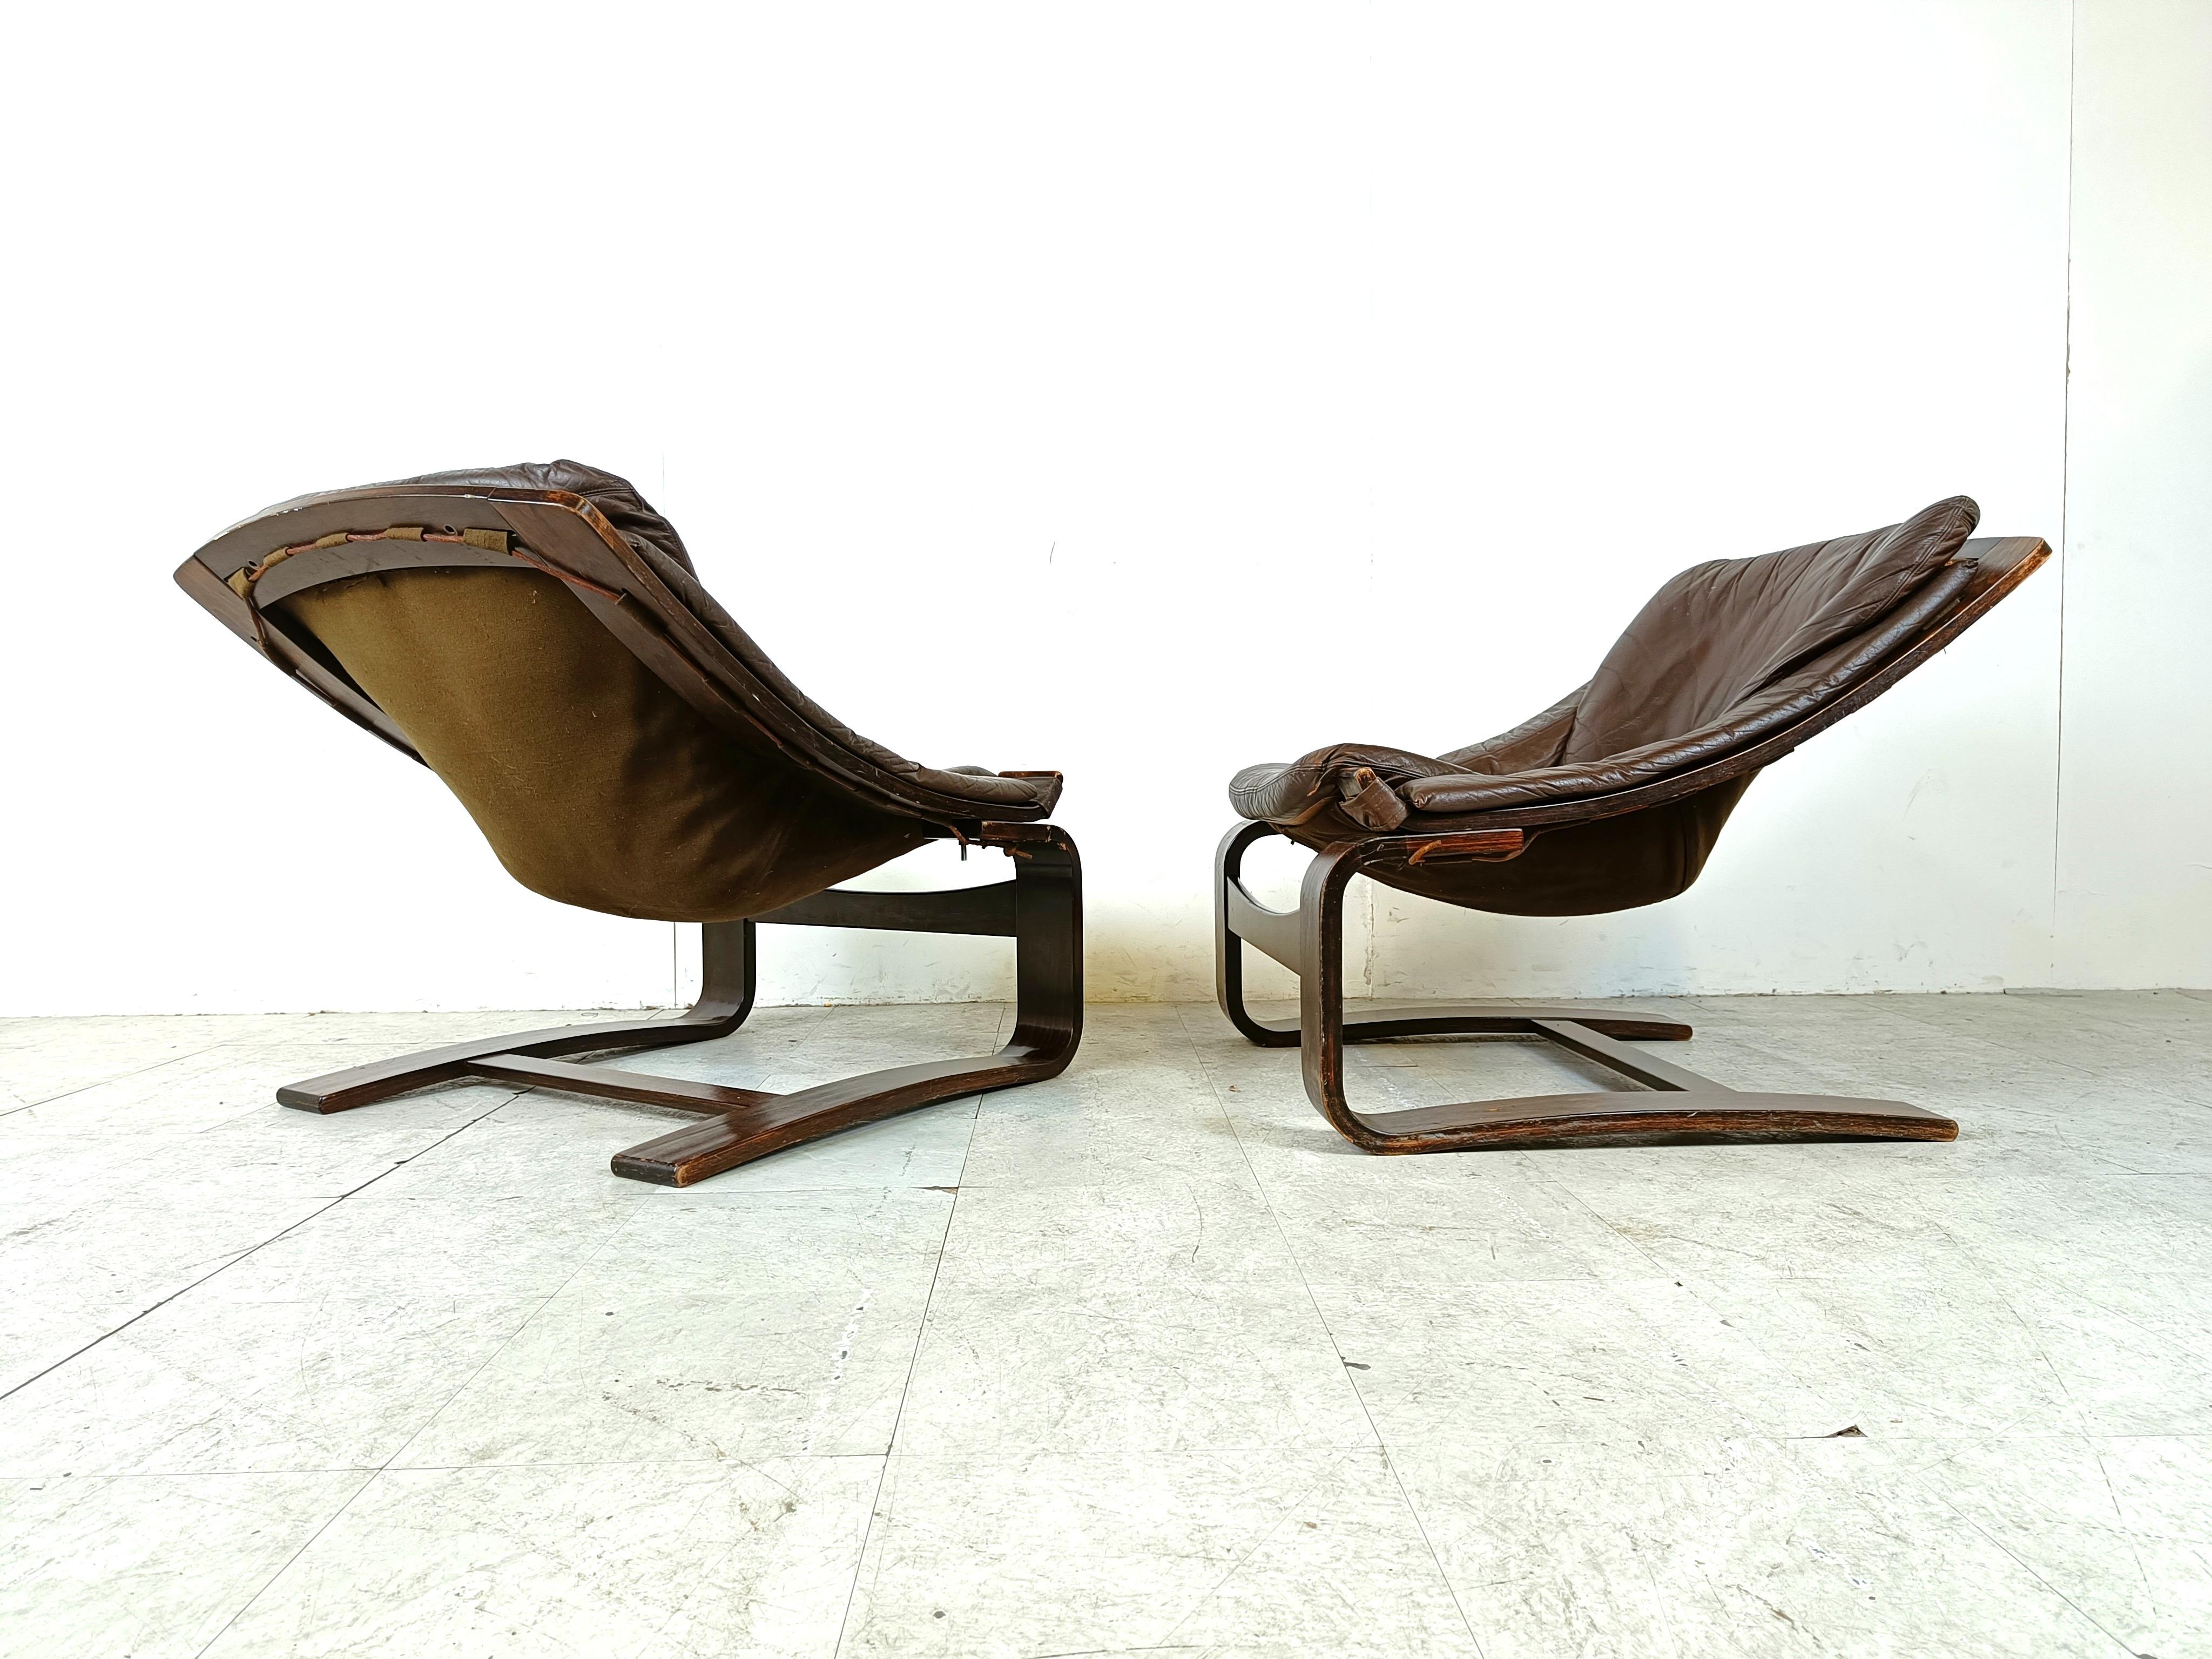 Leather Swedish Kroken Armchairs by Ake Fribyter for Nelo Möbel, 1970s, set of 2 For Sale